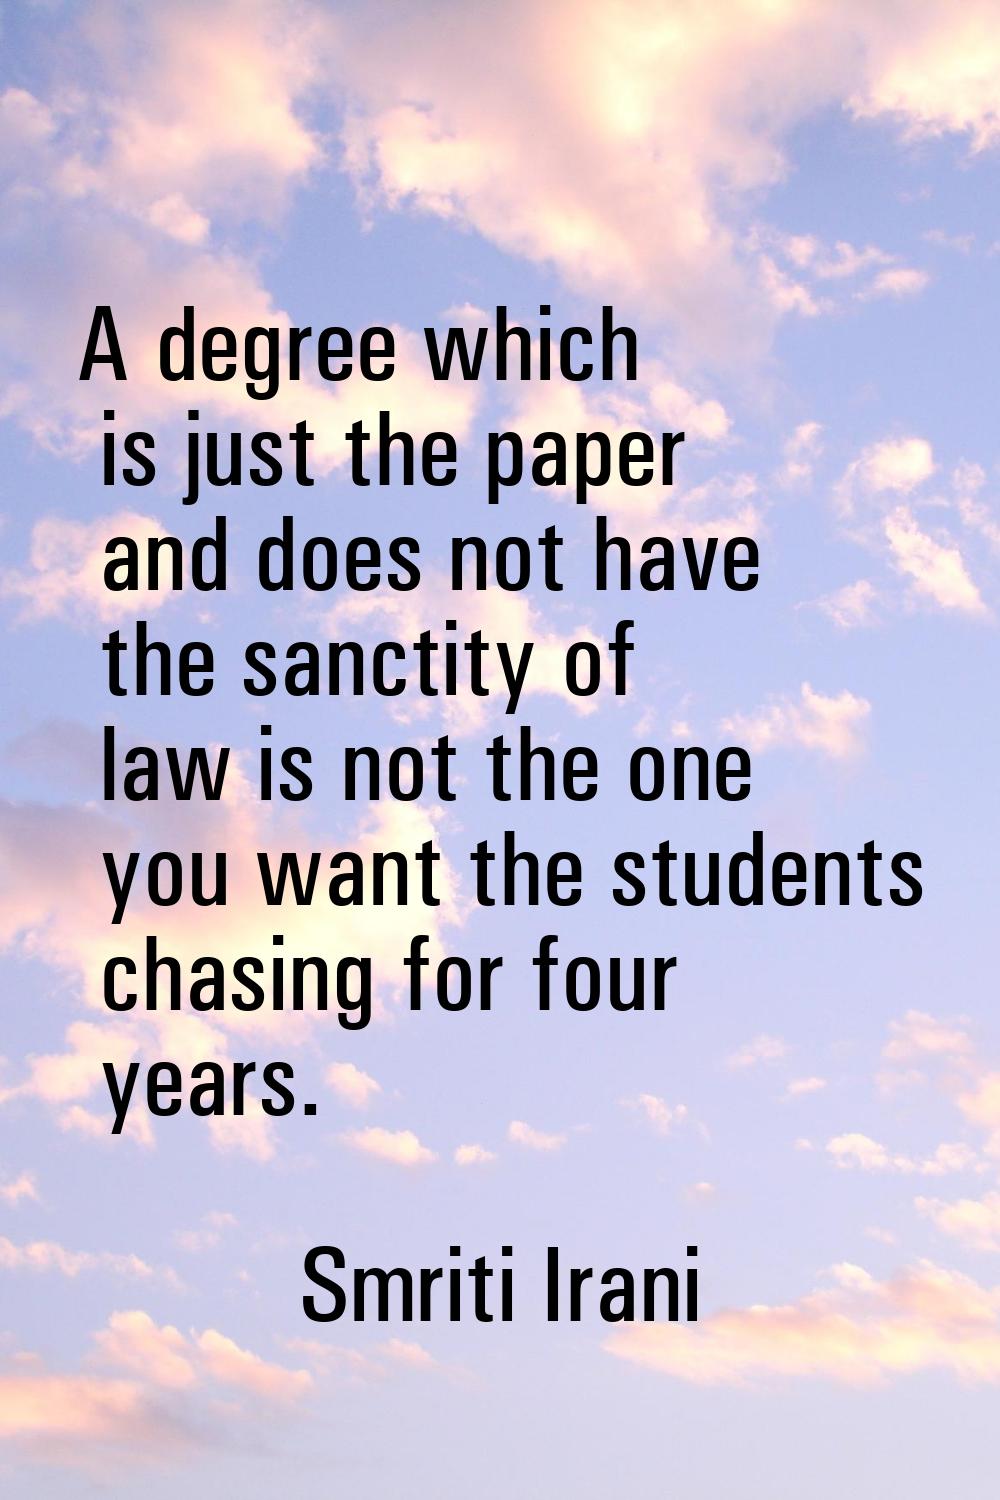 A degree which is just the paper and does not have the sanctity of law is not the one you want the 